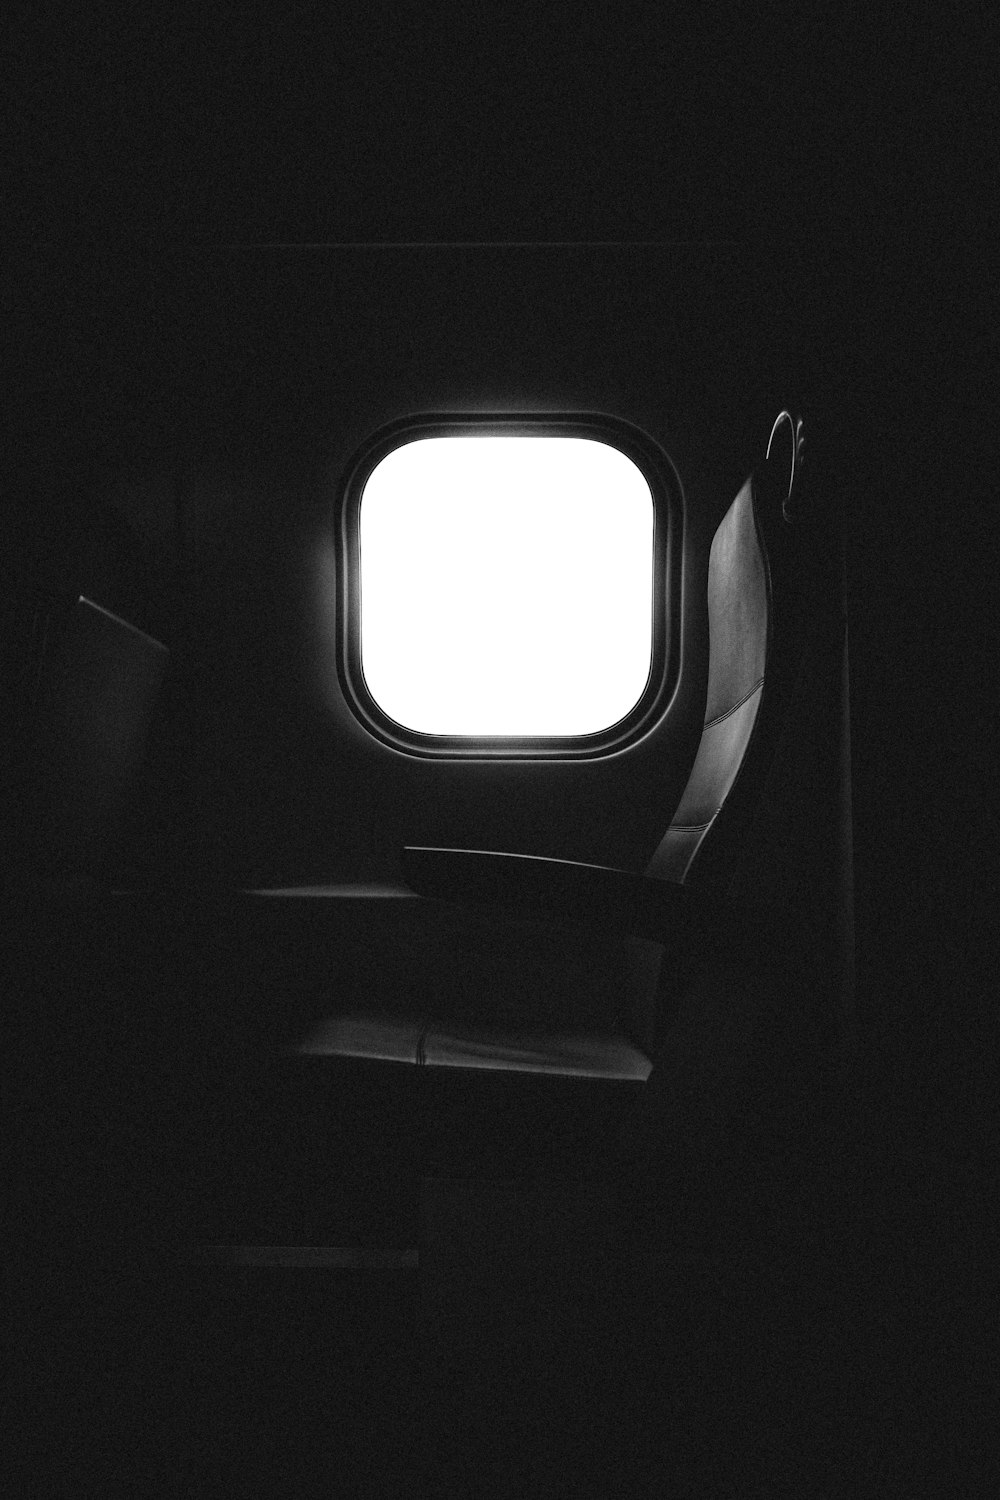 window of an airplane with a seat